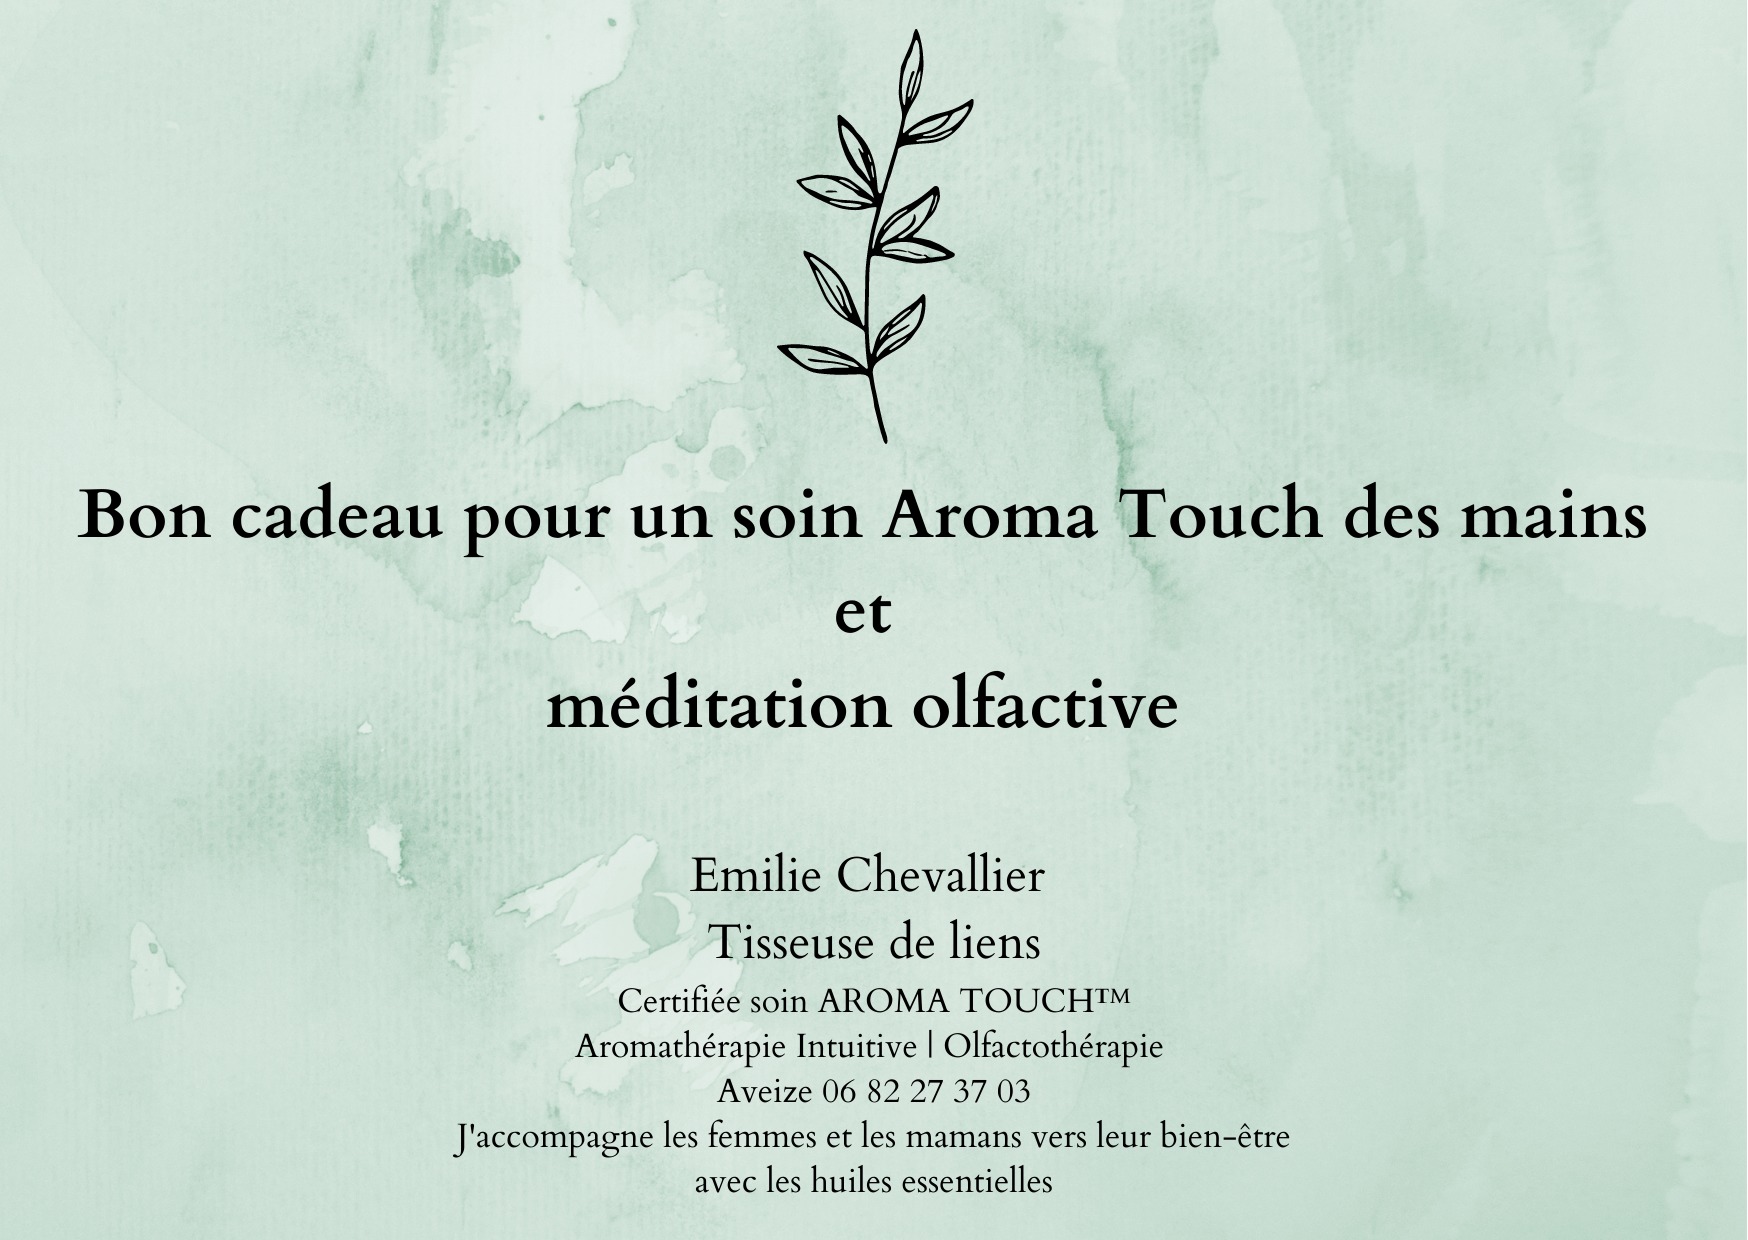 Soin Aroma Touch des mains